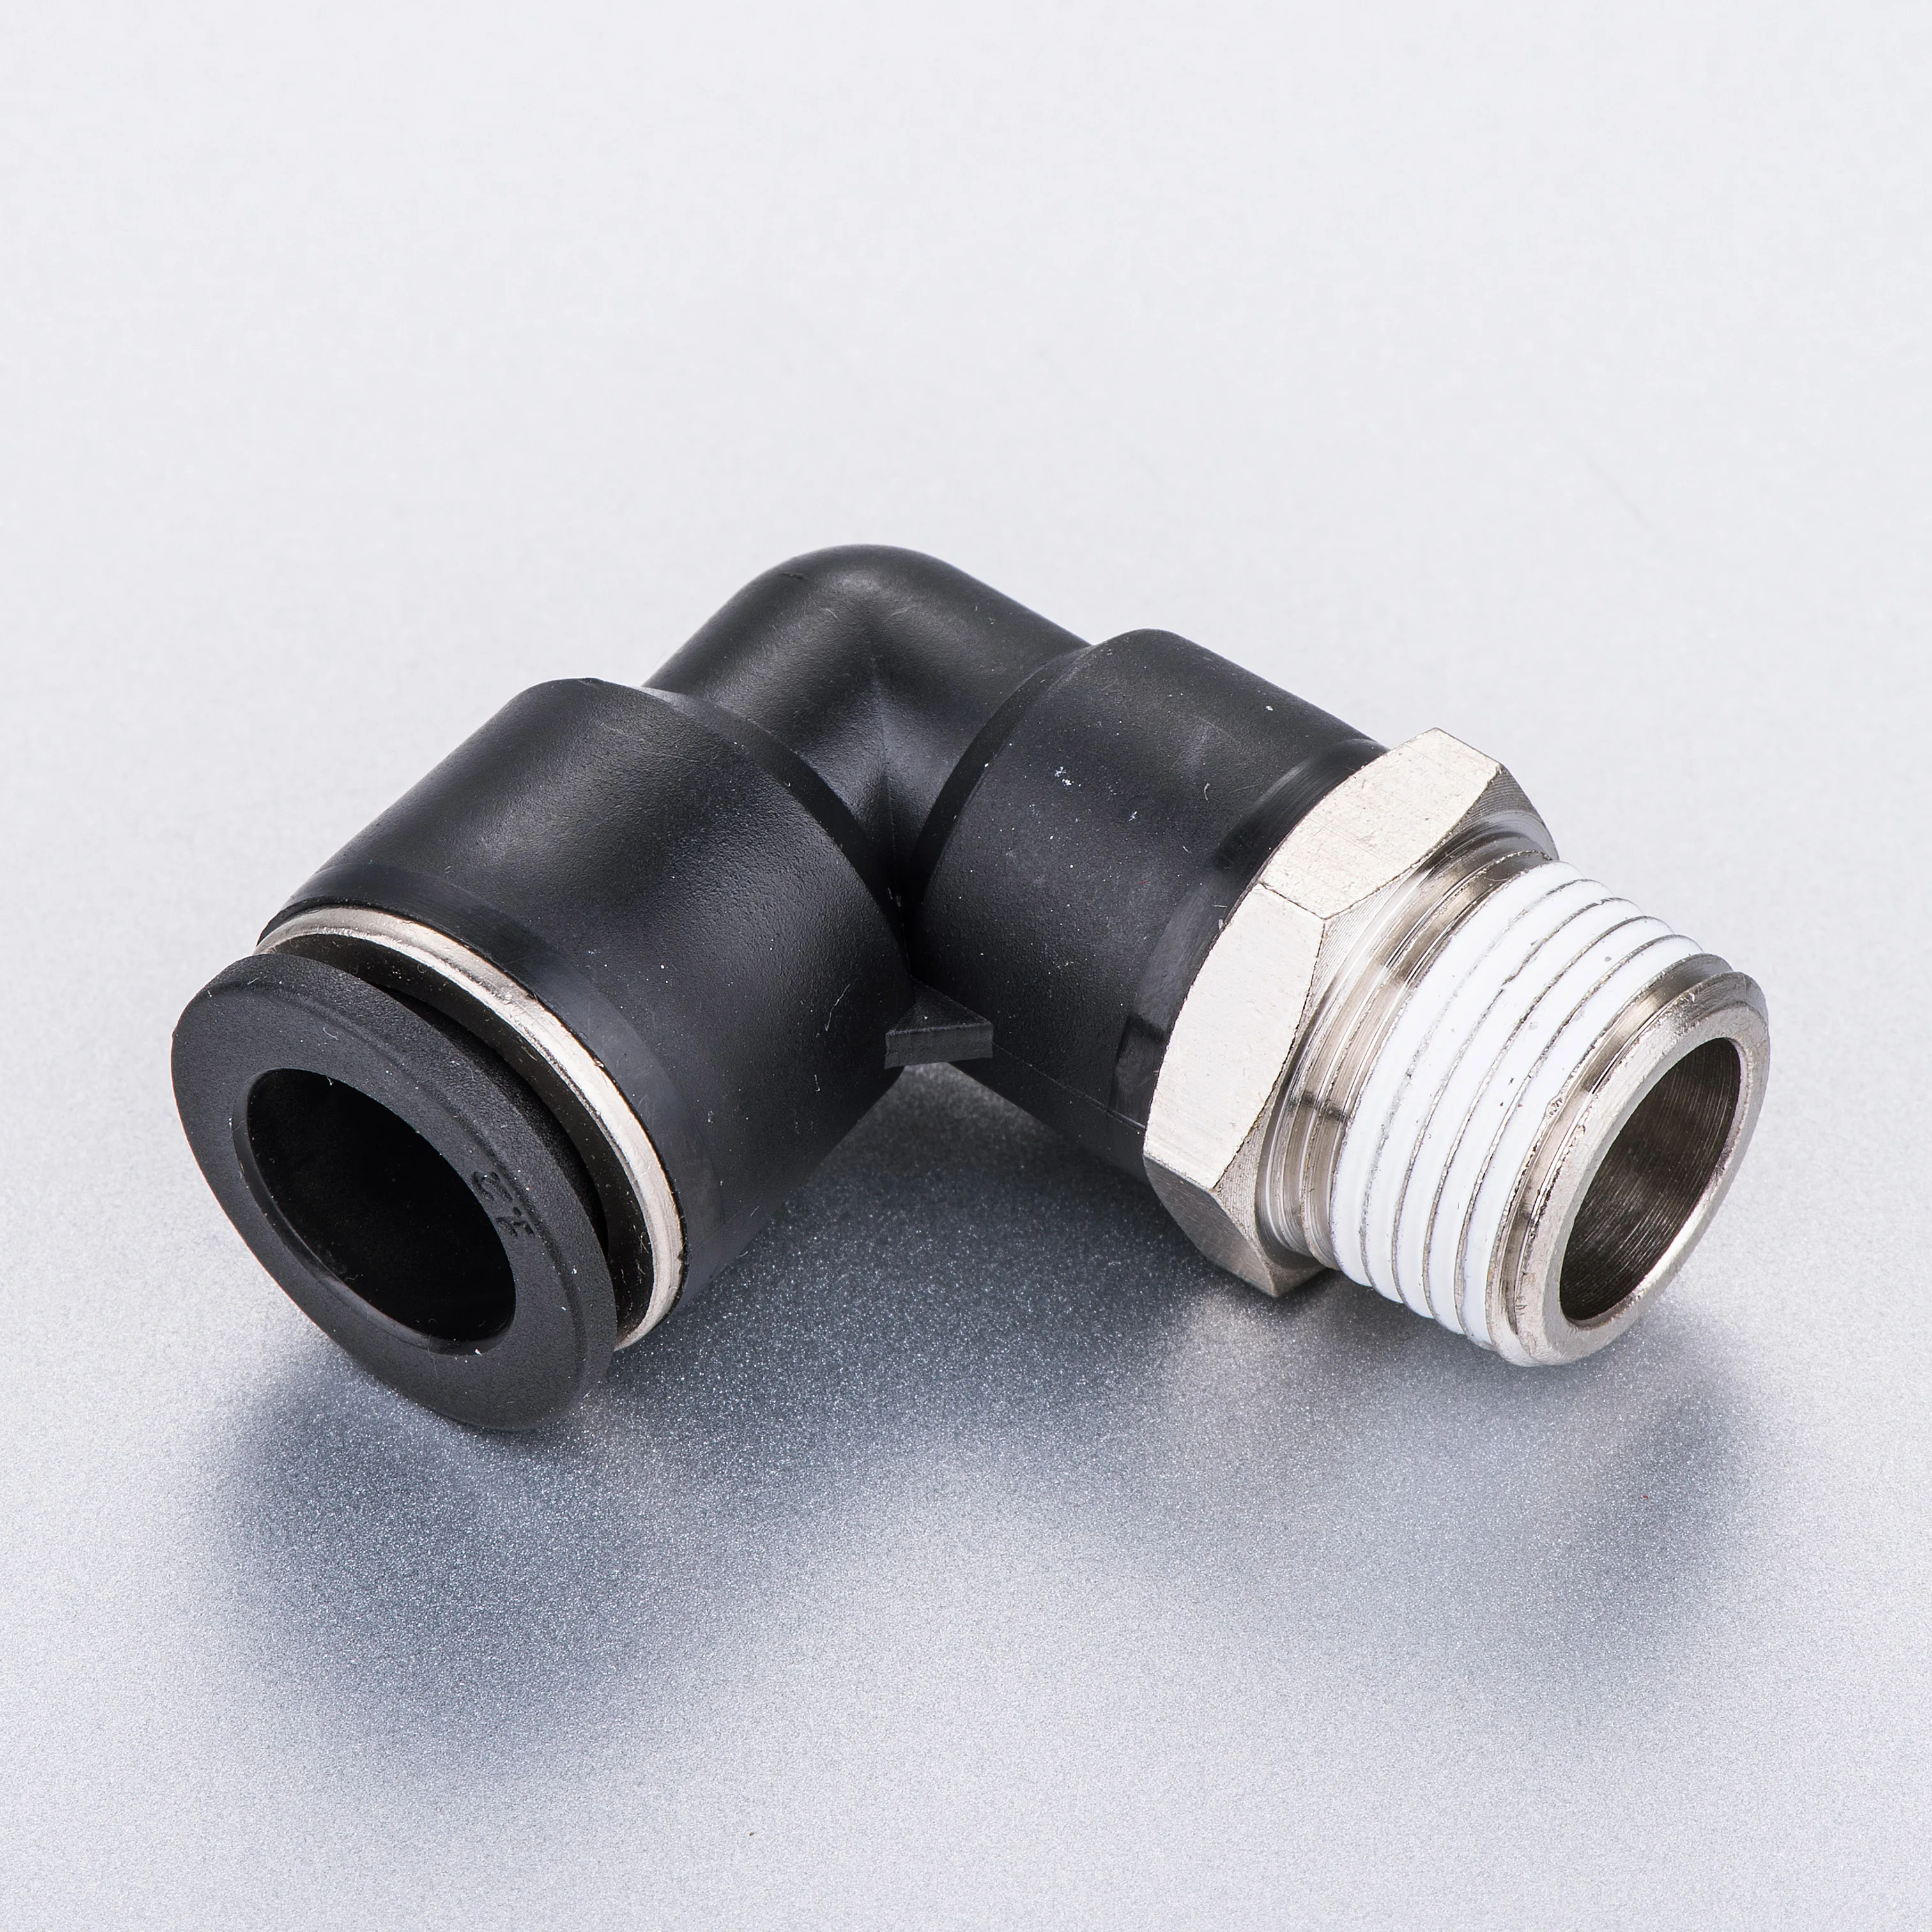 WuLian 5Pcs Hole Diameter 12mm x 3/8PT Male Thread 90 Degree Quick Fitting Joint Air Pipe Pneumatic Fittings PL12-03 